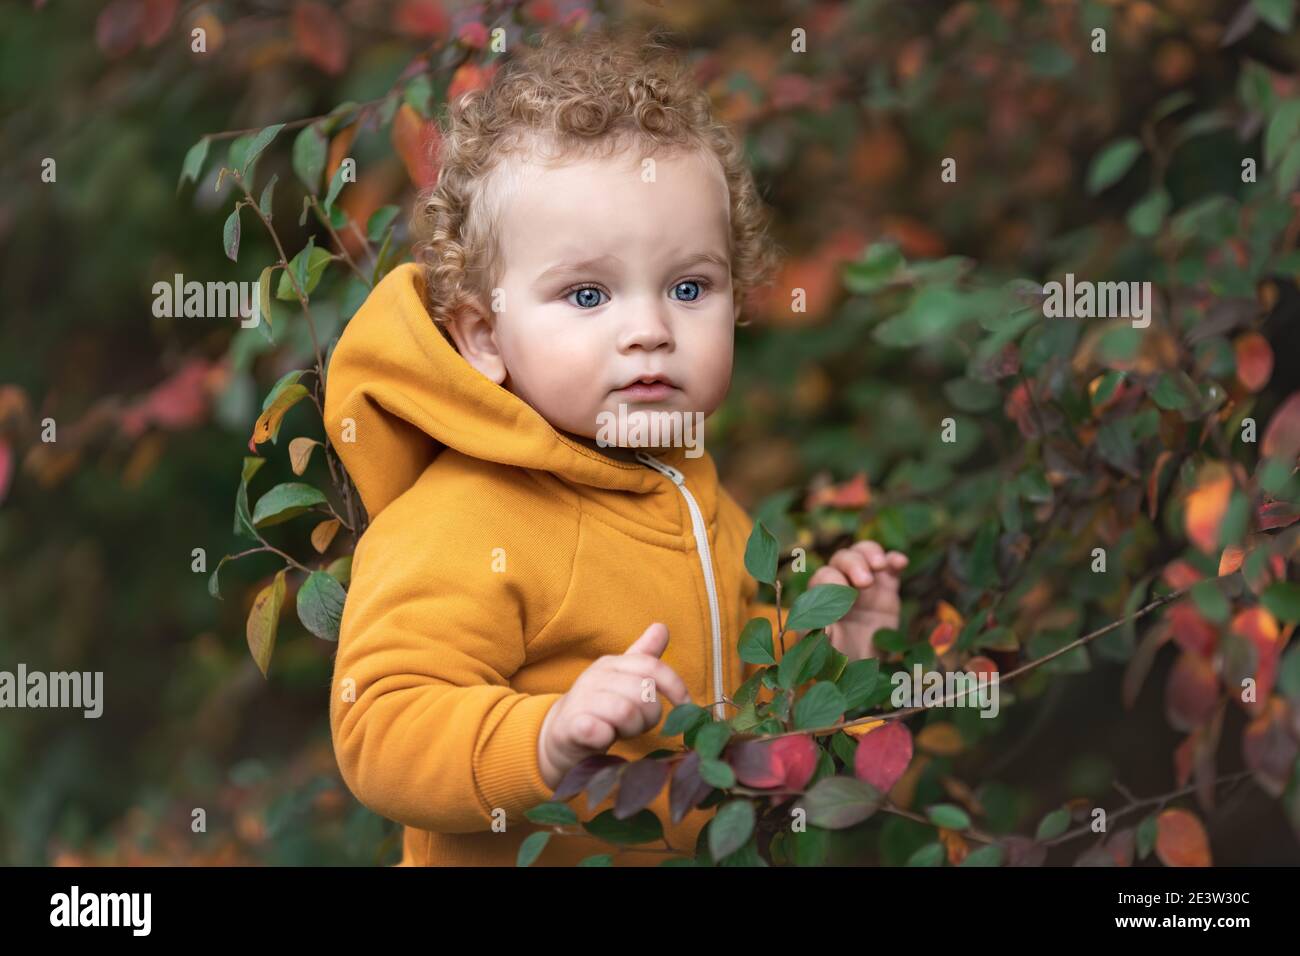 Cute Little Boy With Curly Hair And Big Blue Eyes Among Autumn Leaves Stock  Photo - Alamy